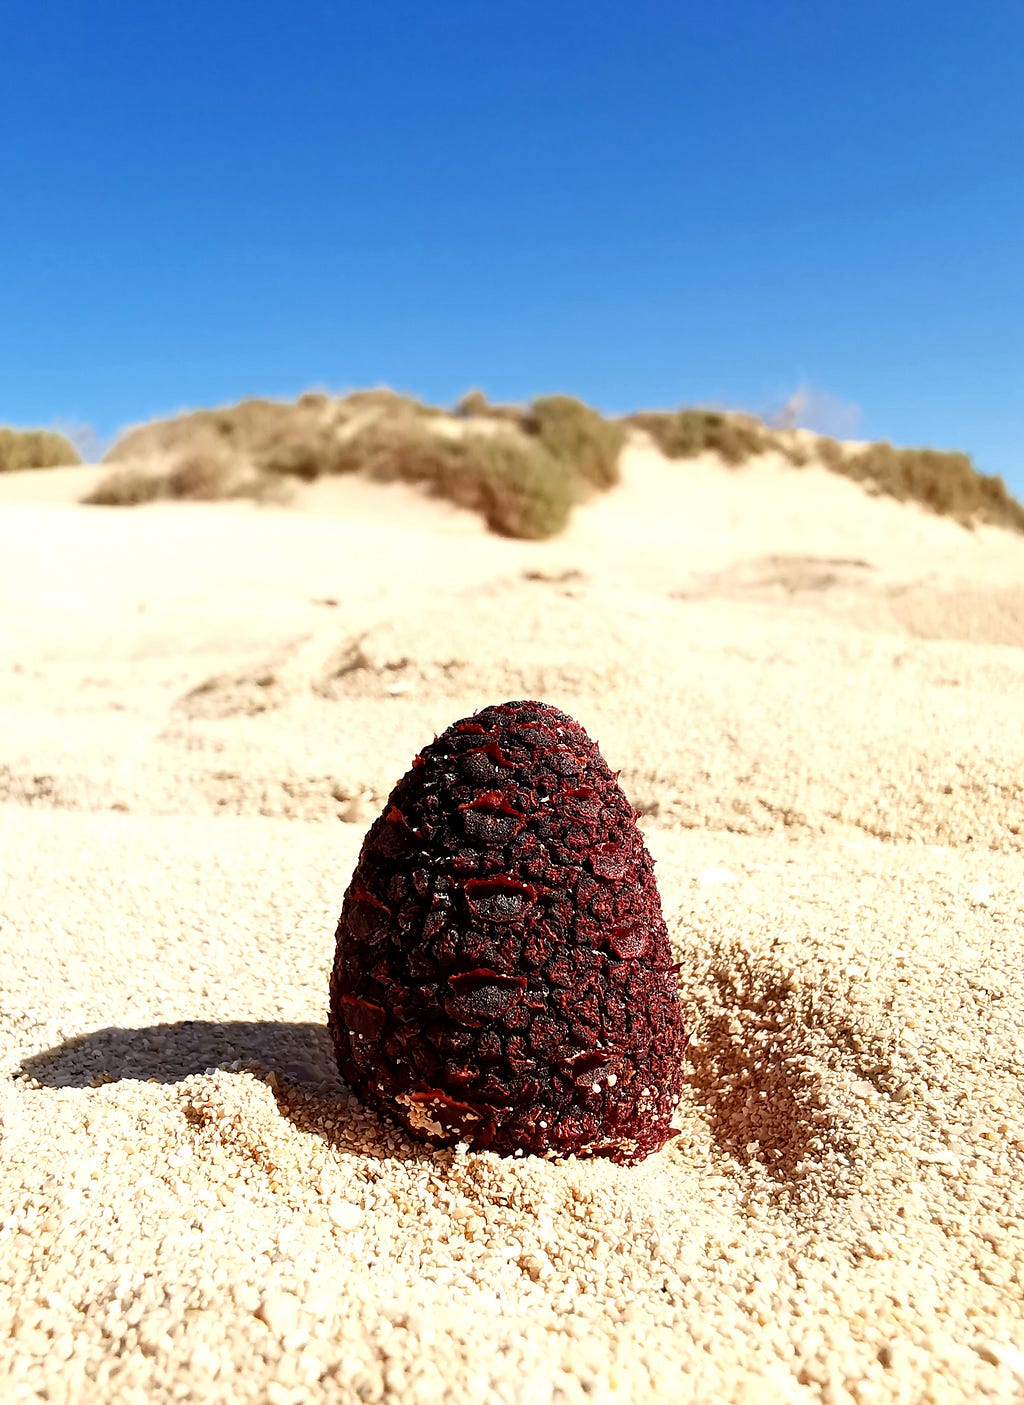 Photo of Cynomorium coccineum a parasitic plant, ruby coloured with black, leafless sprouts jammed with tiny flowers that jut out of the sand. The plant is pictured growing out of a sand dune with blue sky on the Canary Islands.